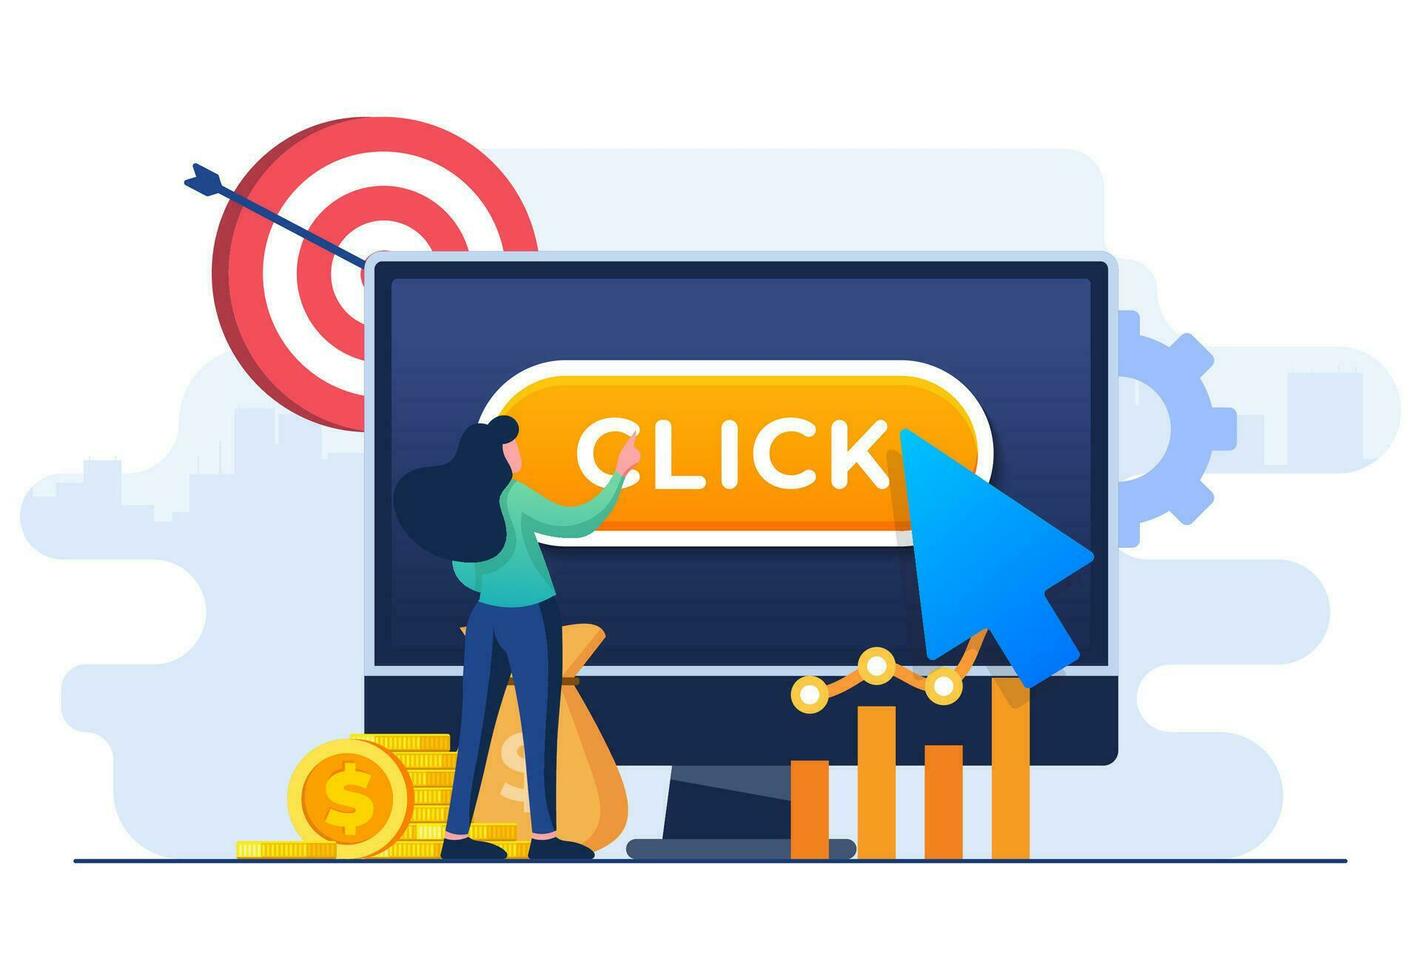 Paid advertising campaign, Click button displayed on computer screen, Pay per click concept, PPC, Advertising or advertisement, Promoting brands to audience, Internet marketing concept vector